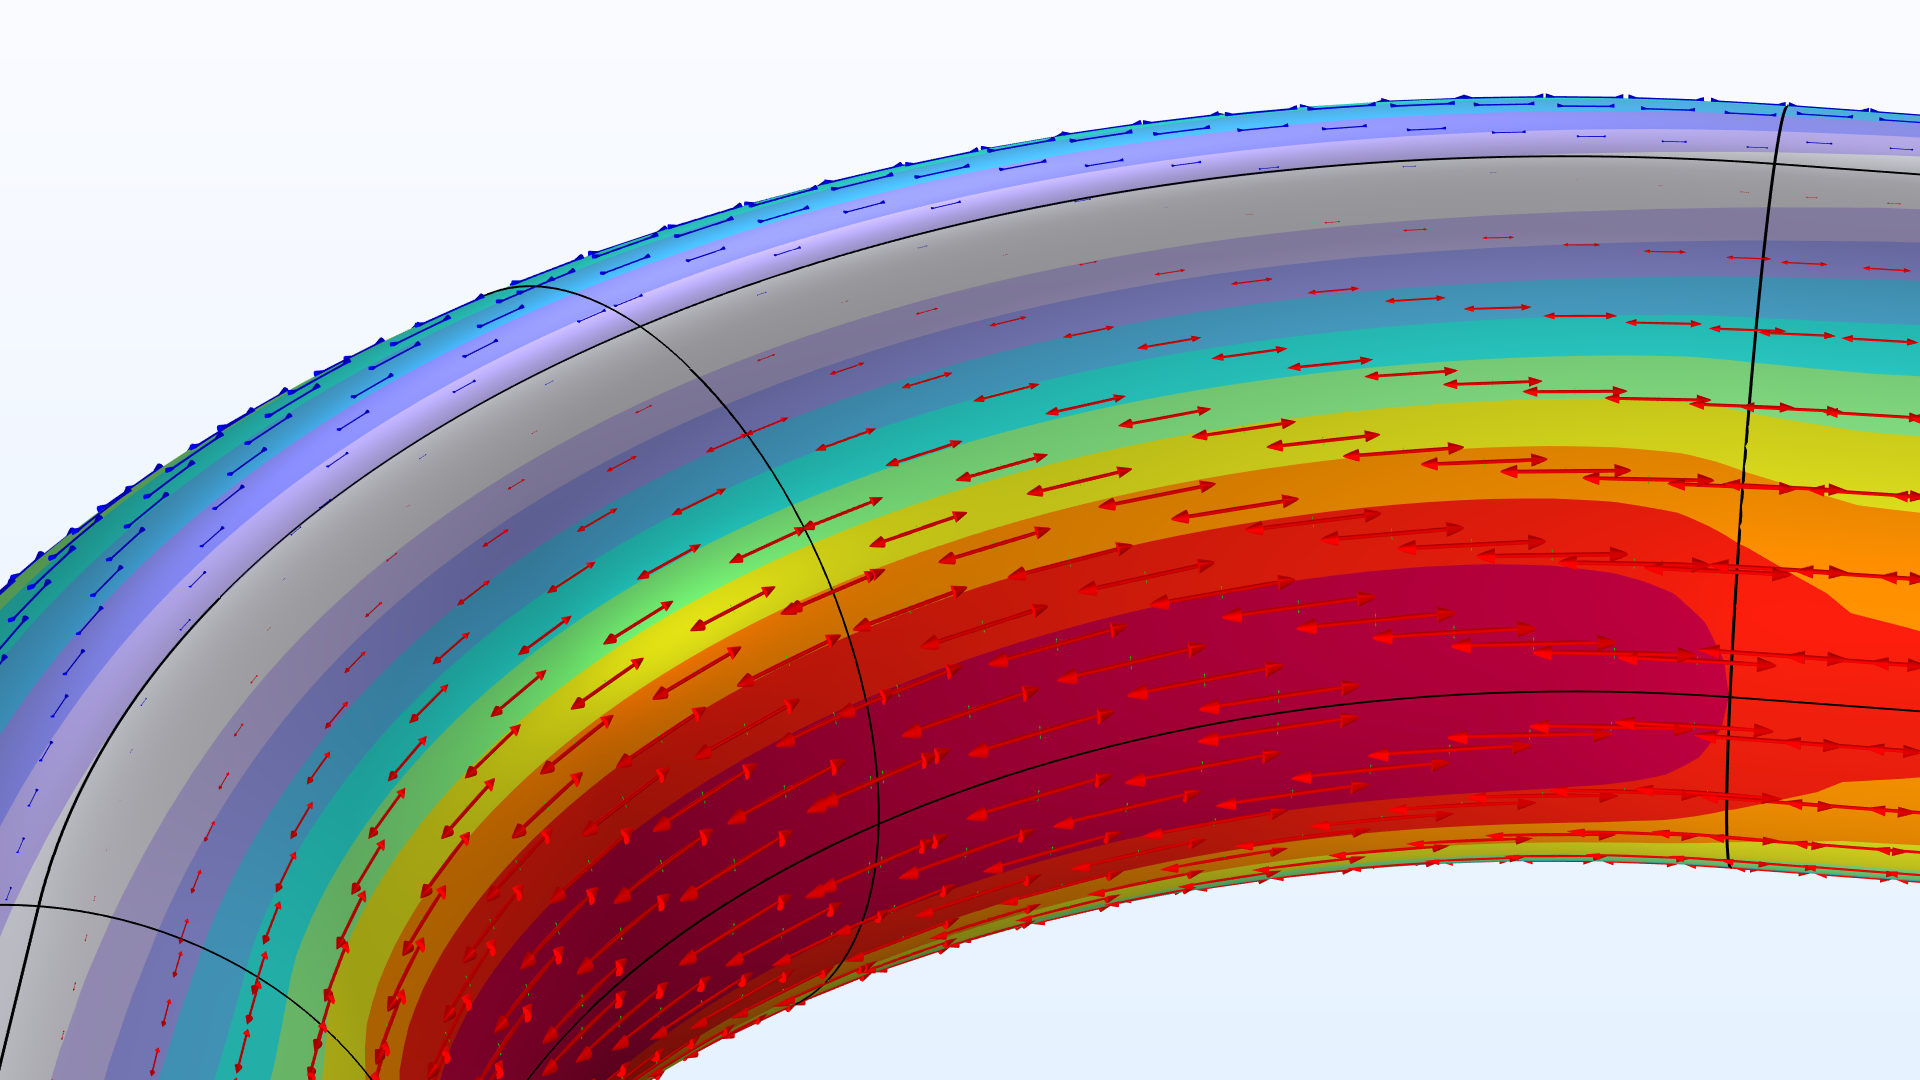 A close-up view of the pipe bend showing the Von Mises stress and principal stresses for a wall thickness of 75 percent.